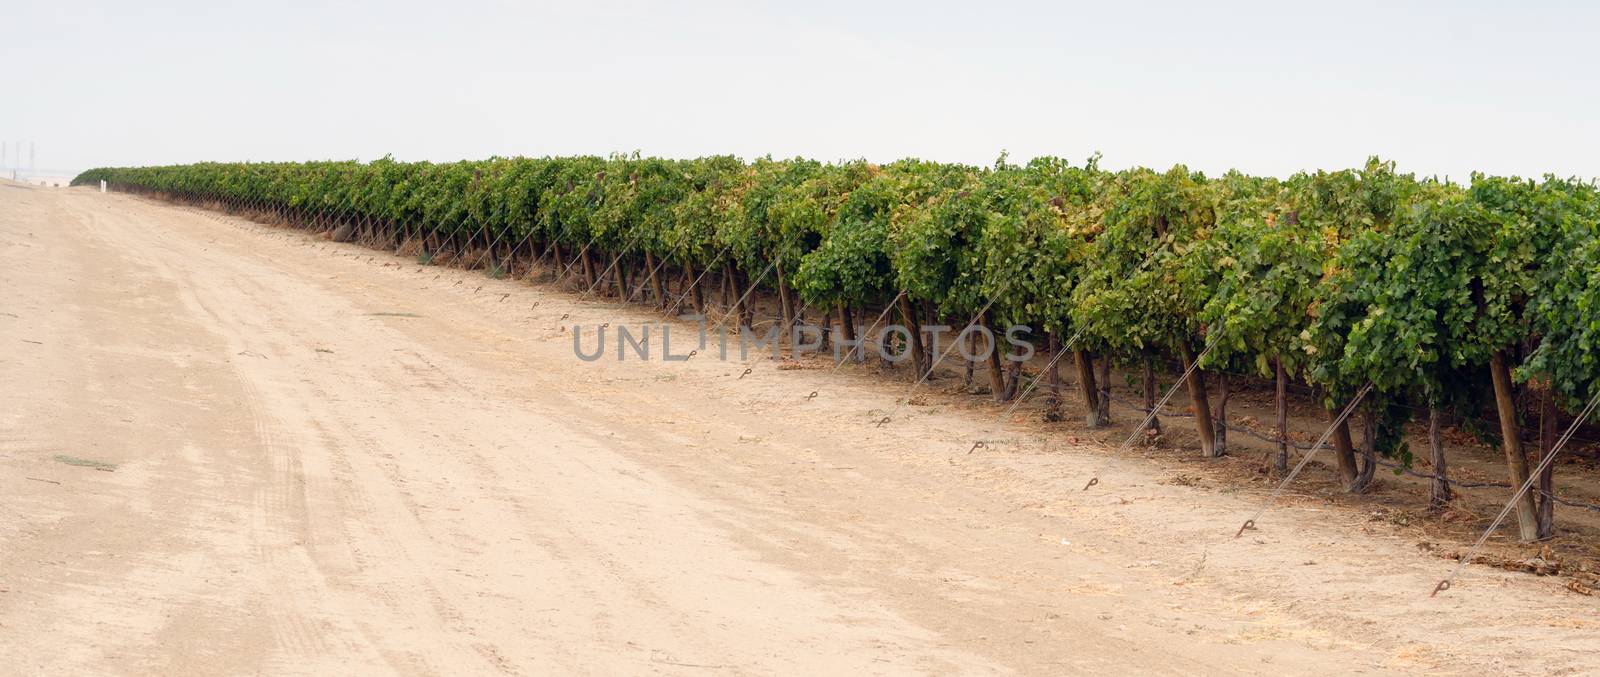 Look at the care put into these grape fields